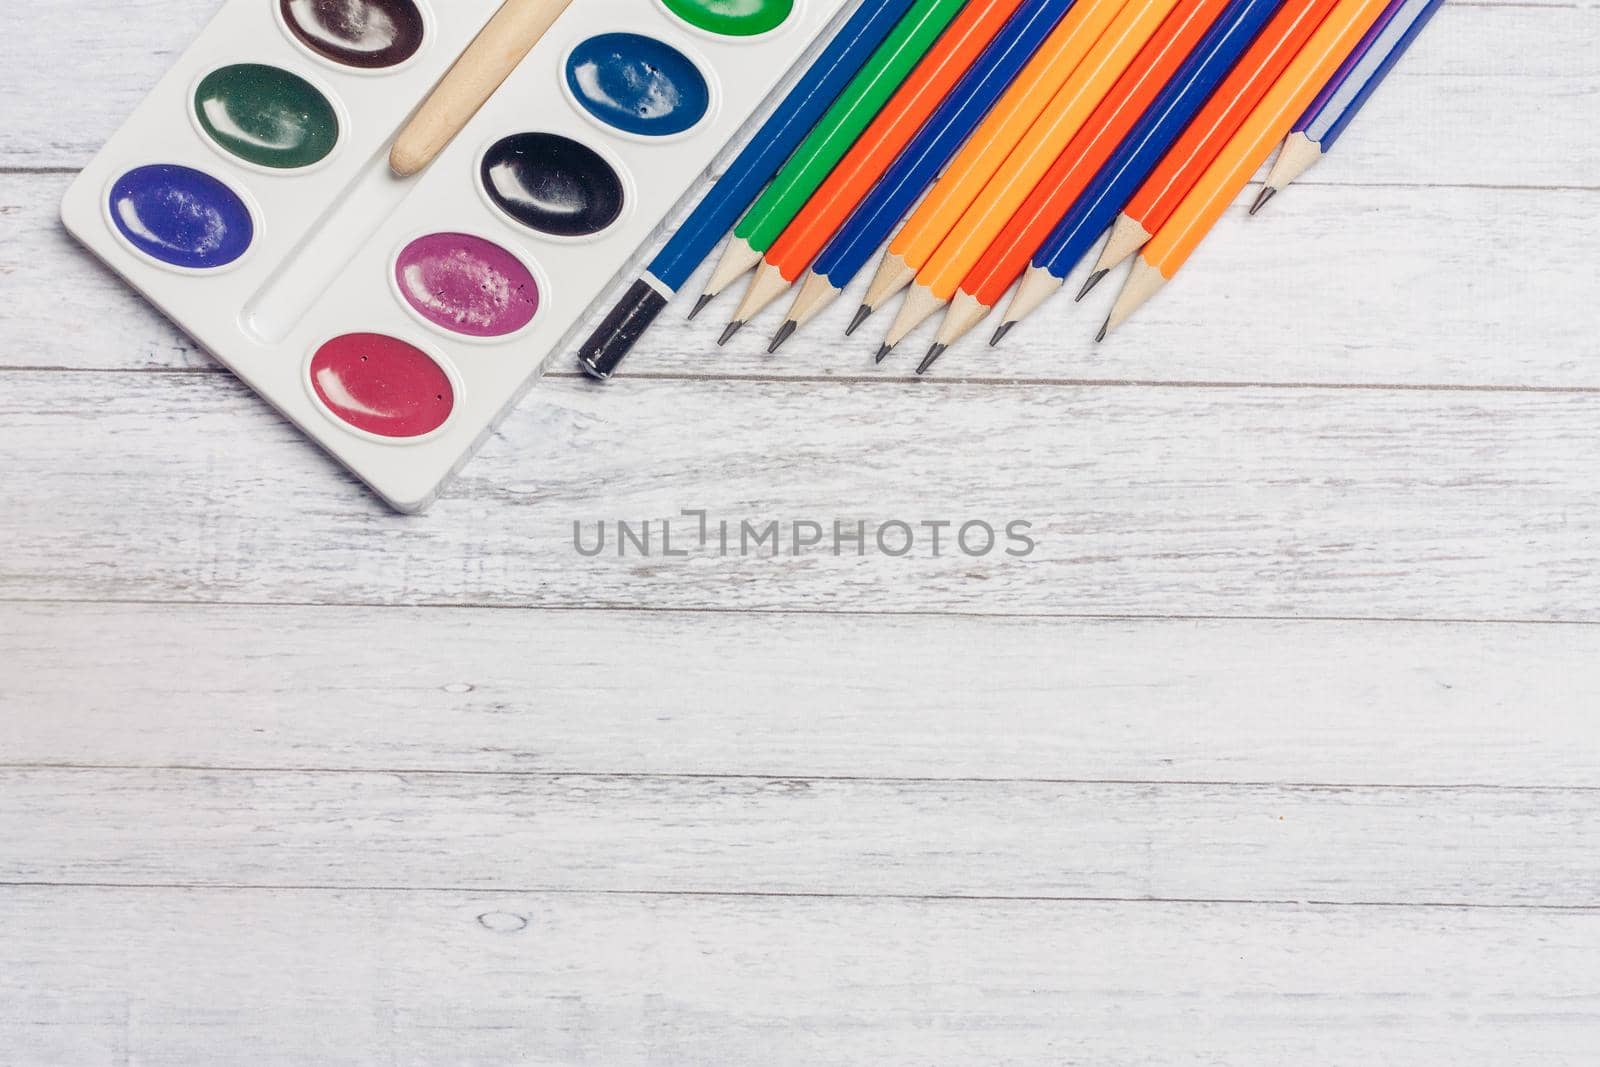 watercolor paint colored pencils wooden table art school drawing background image. High quality photo